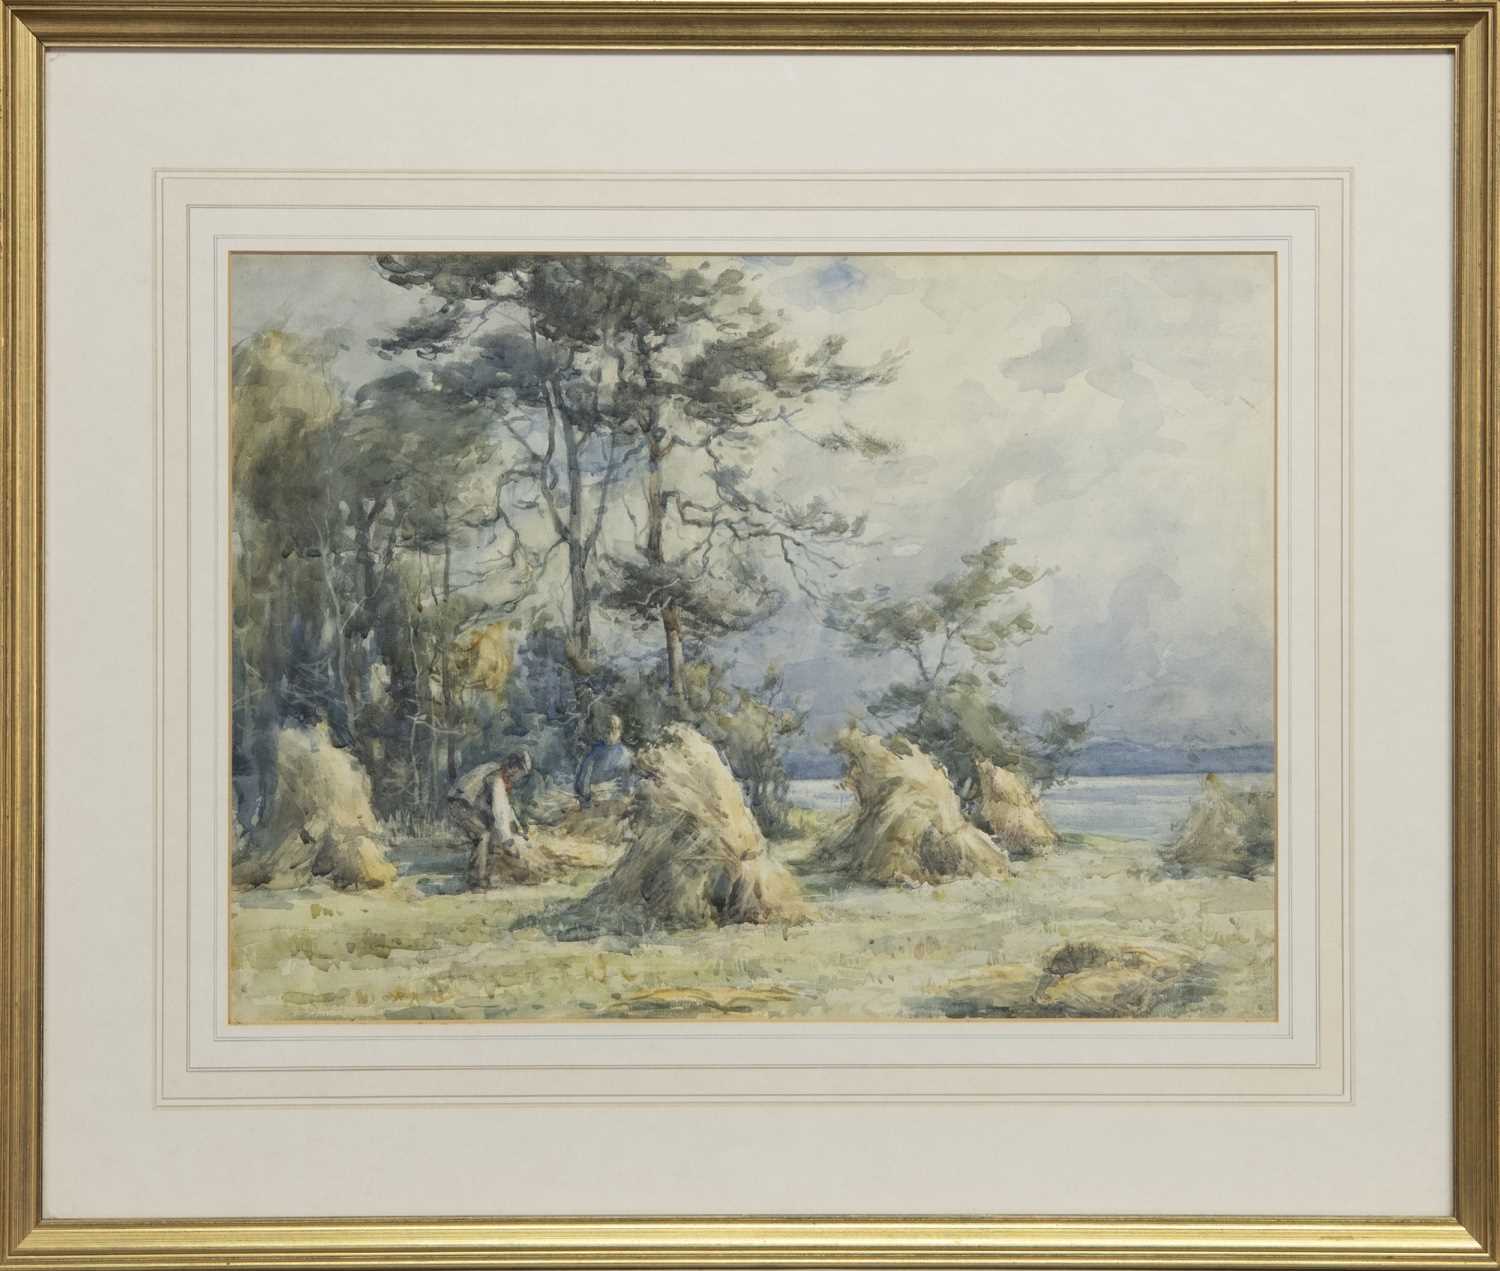 Lot 293 - THE HARVESTERS, A WATERCOLOUR BY JOHN MACLAUCHLAN MILNE